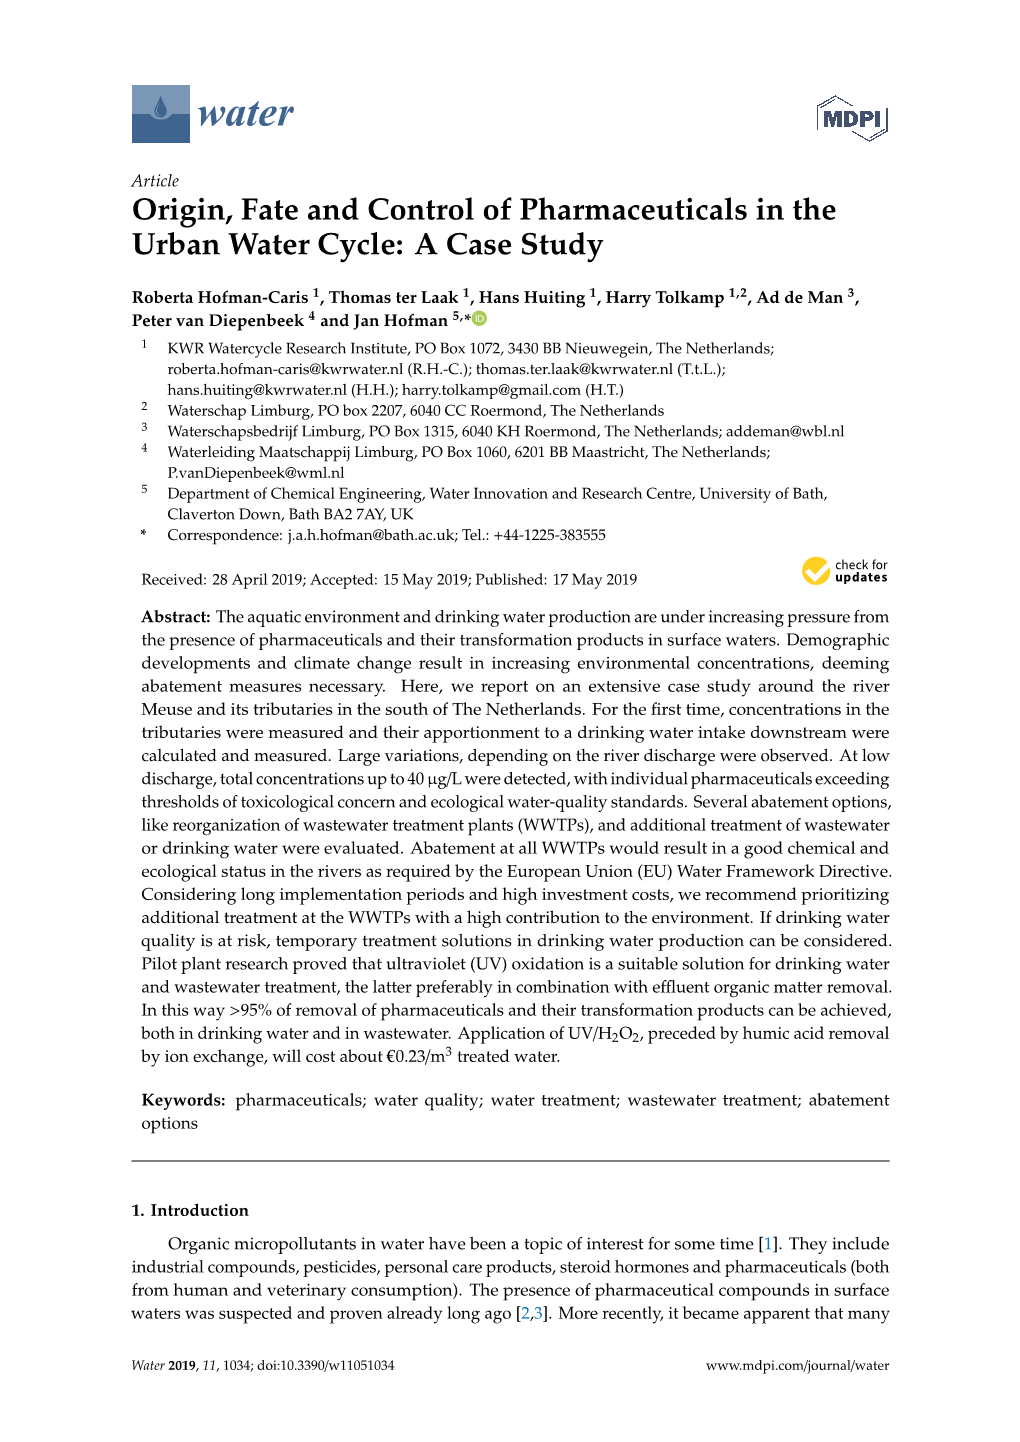 Origin, Fate and Control of Pharmaceuticals in the Urban Water Cycle: a Case Study